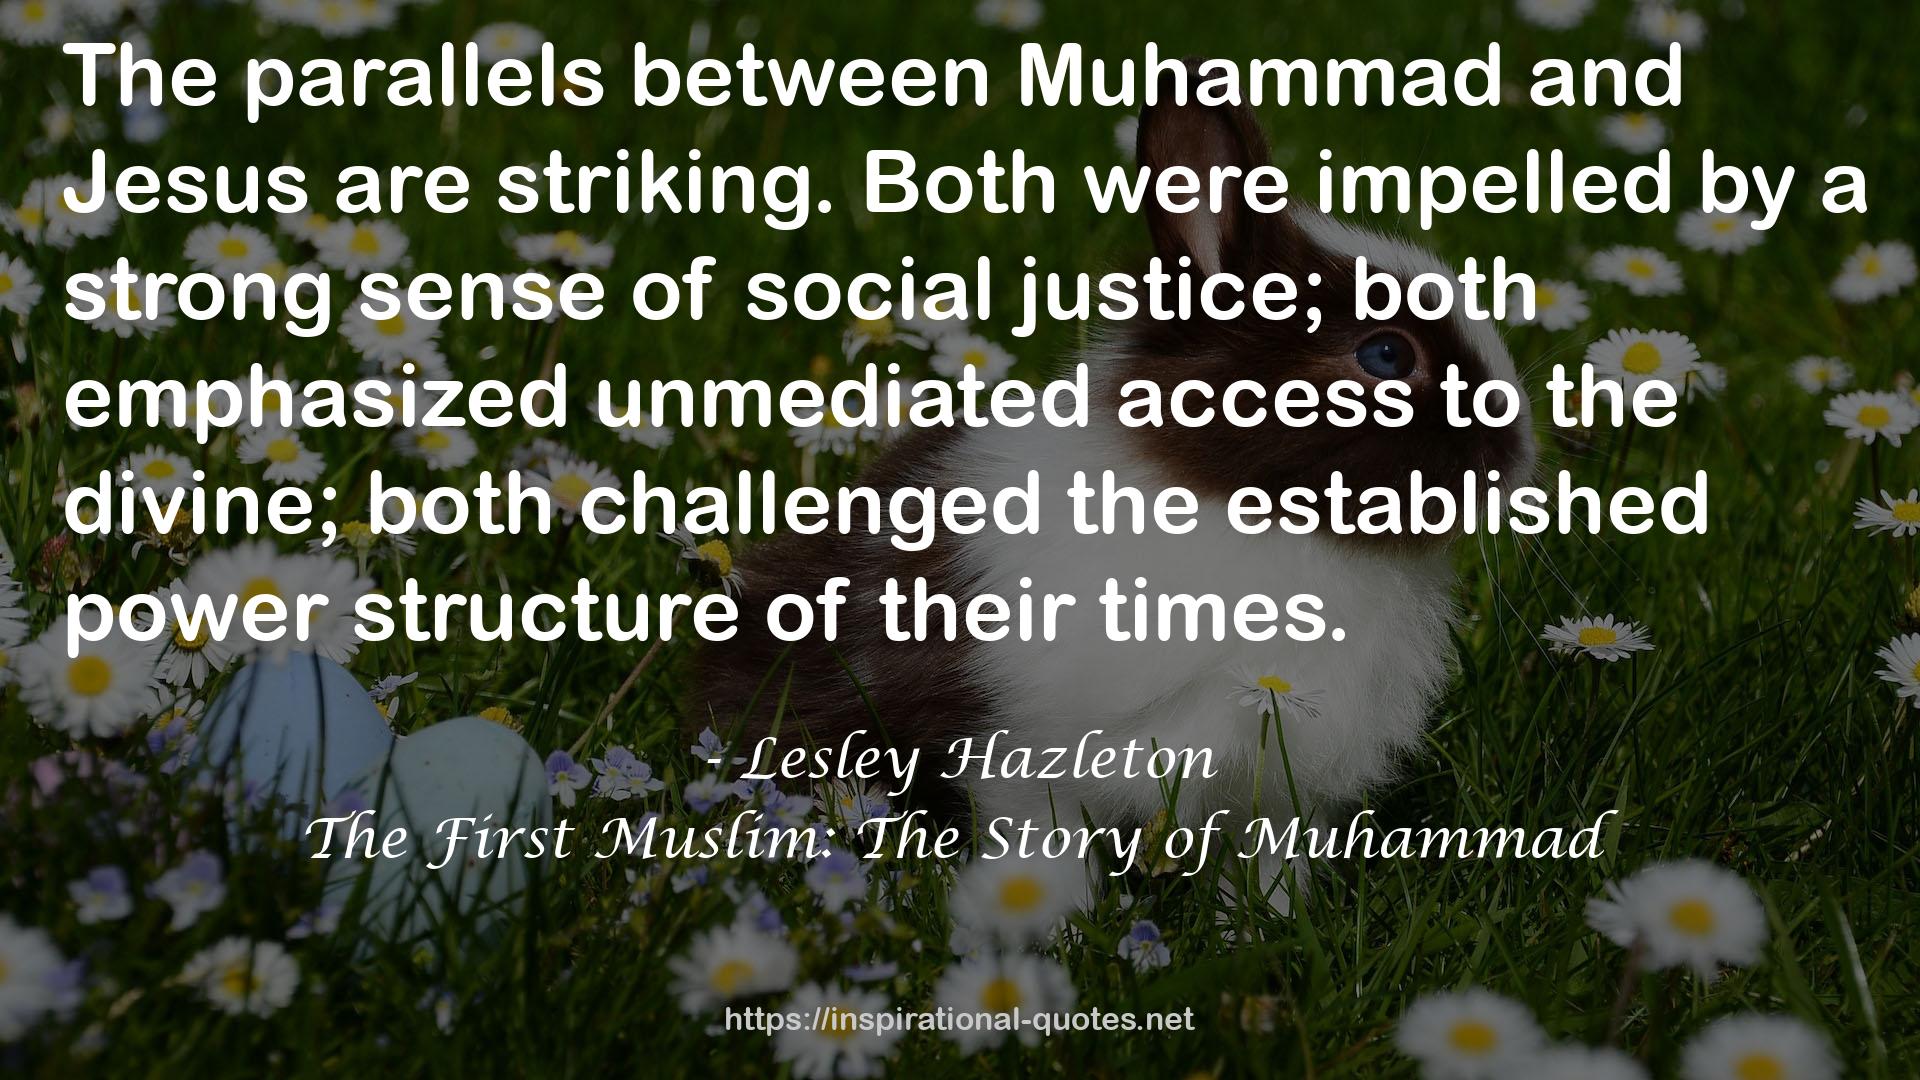 The First Muslim: The Story of Muhammad QUOTES